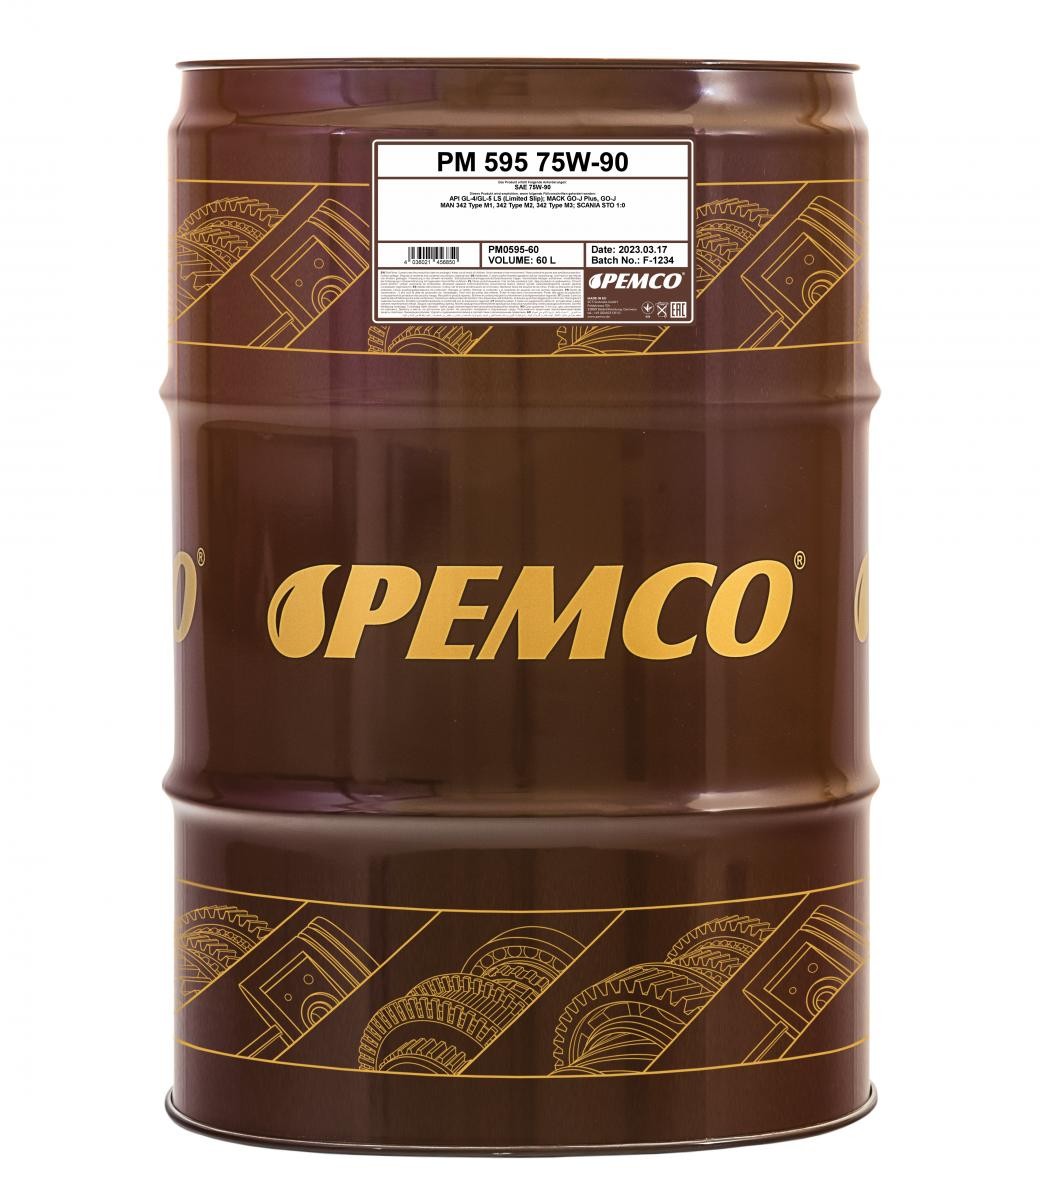 PEMCO iPOID 595 PM0595-60 Manual Transmission Oil Capacity: 60l, 75W-90